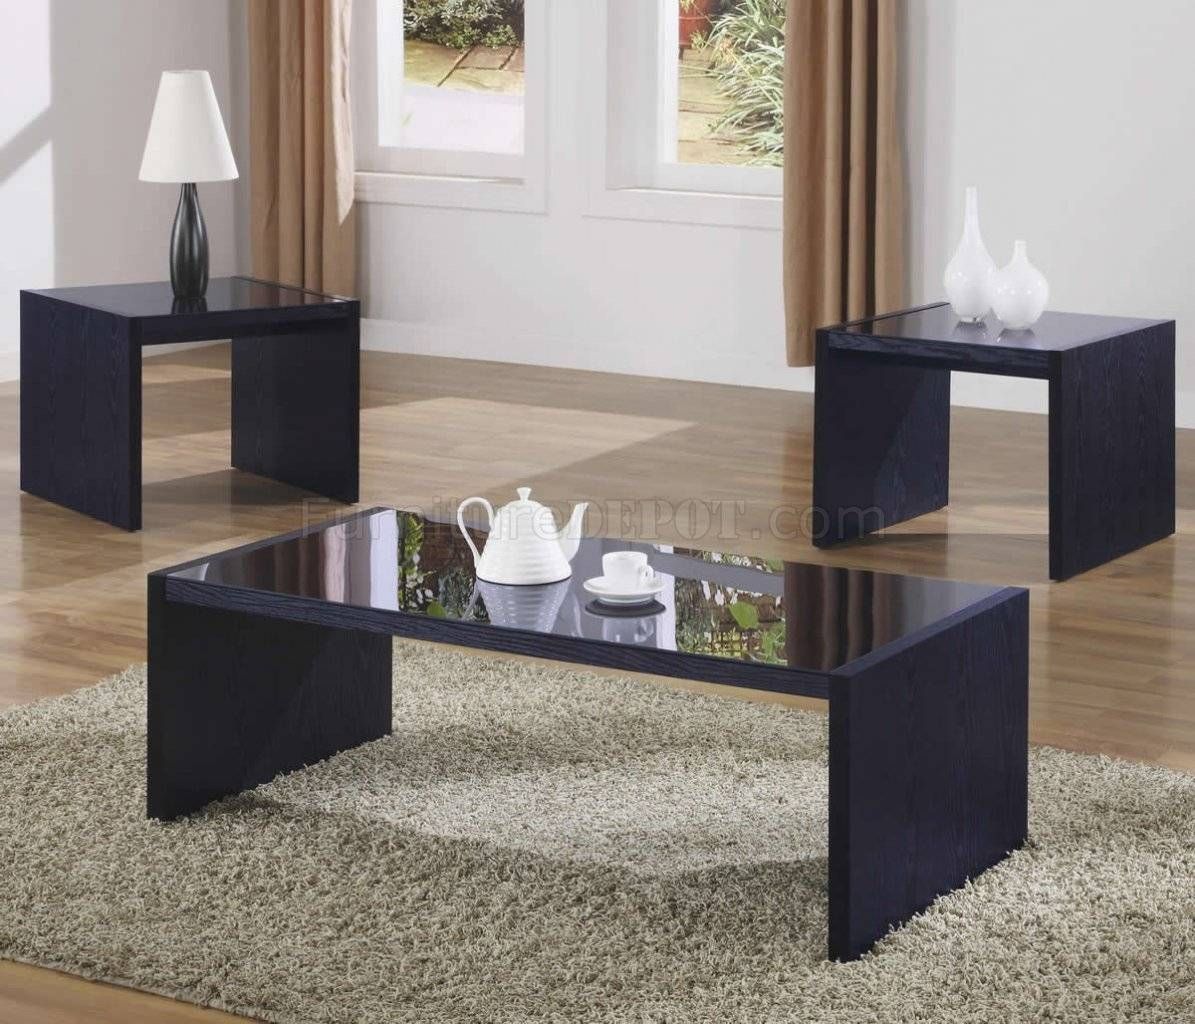 Black Modern 3pc Coffee Table Set W/black Glass Tops With Contemporary Coffee Table Sets (View 3 of 30)